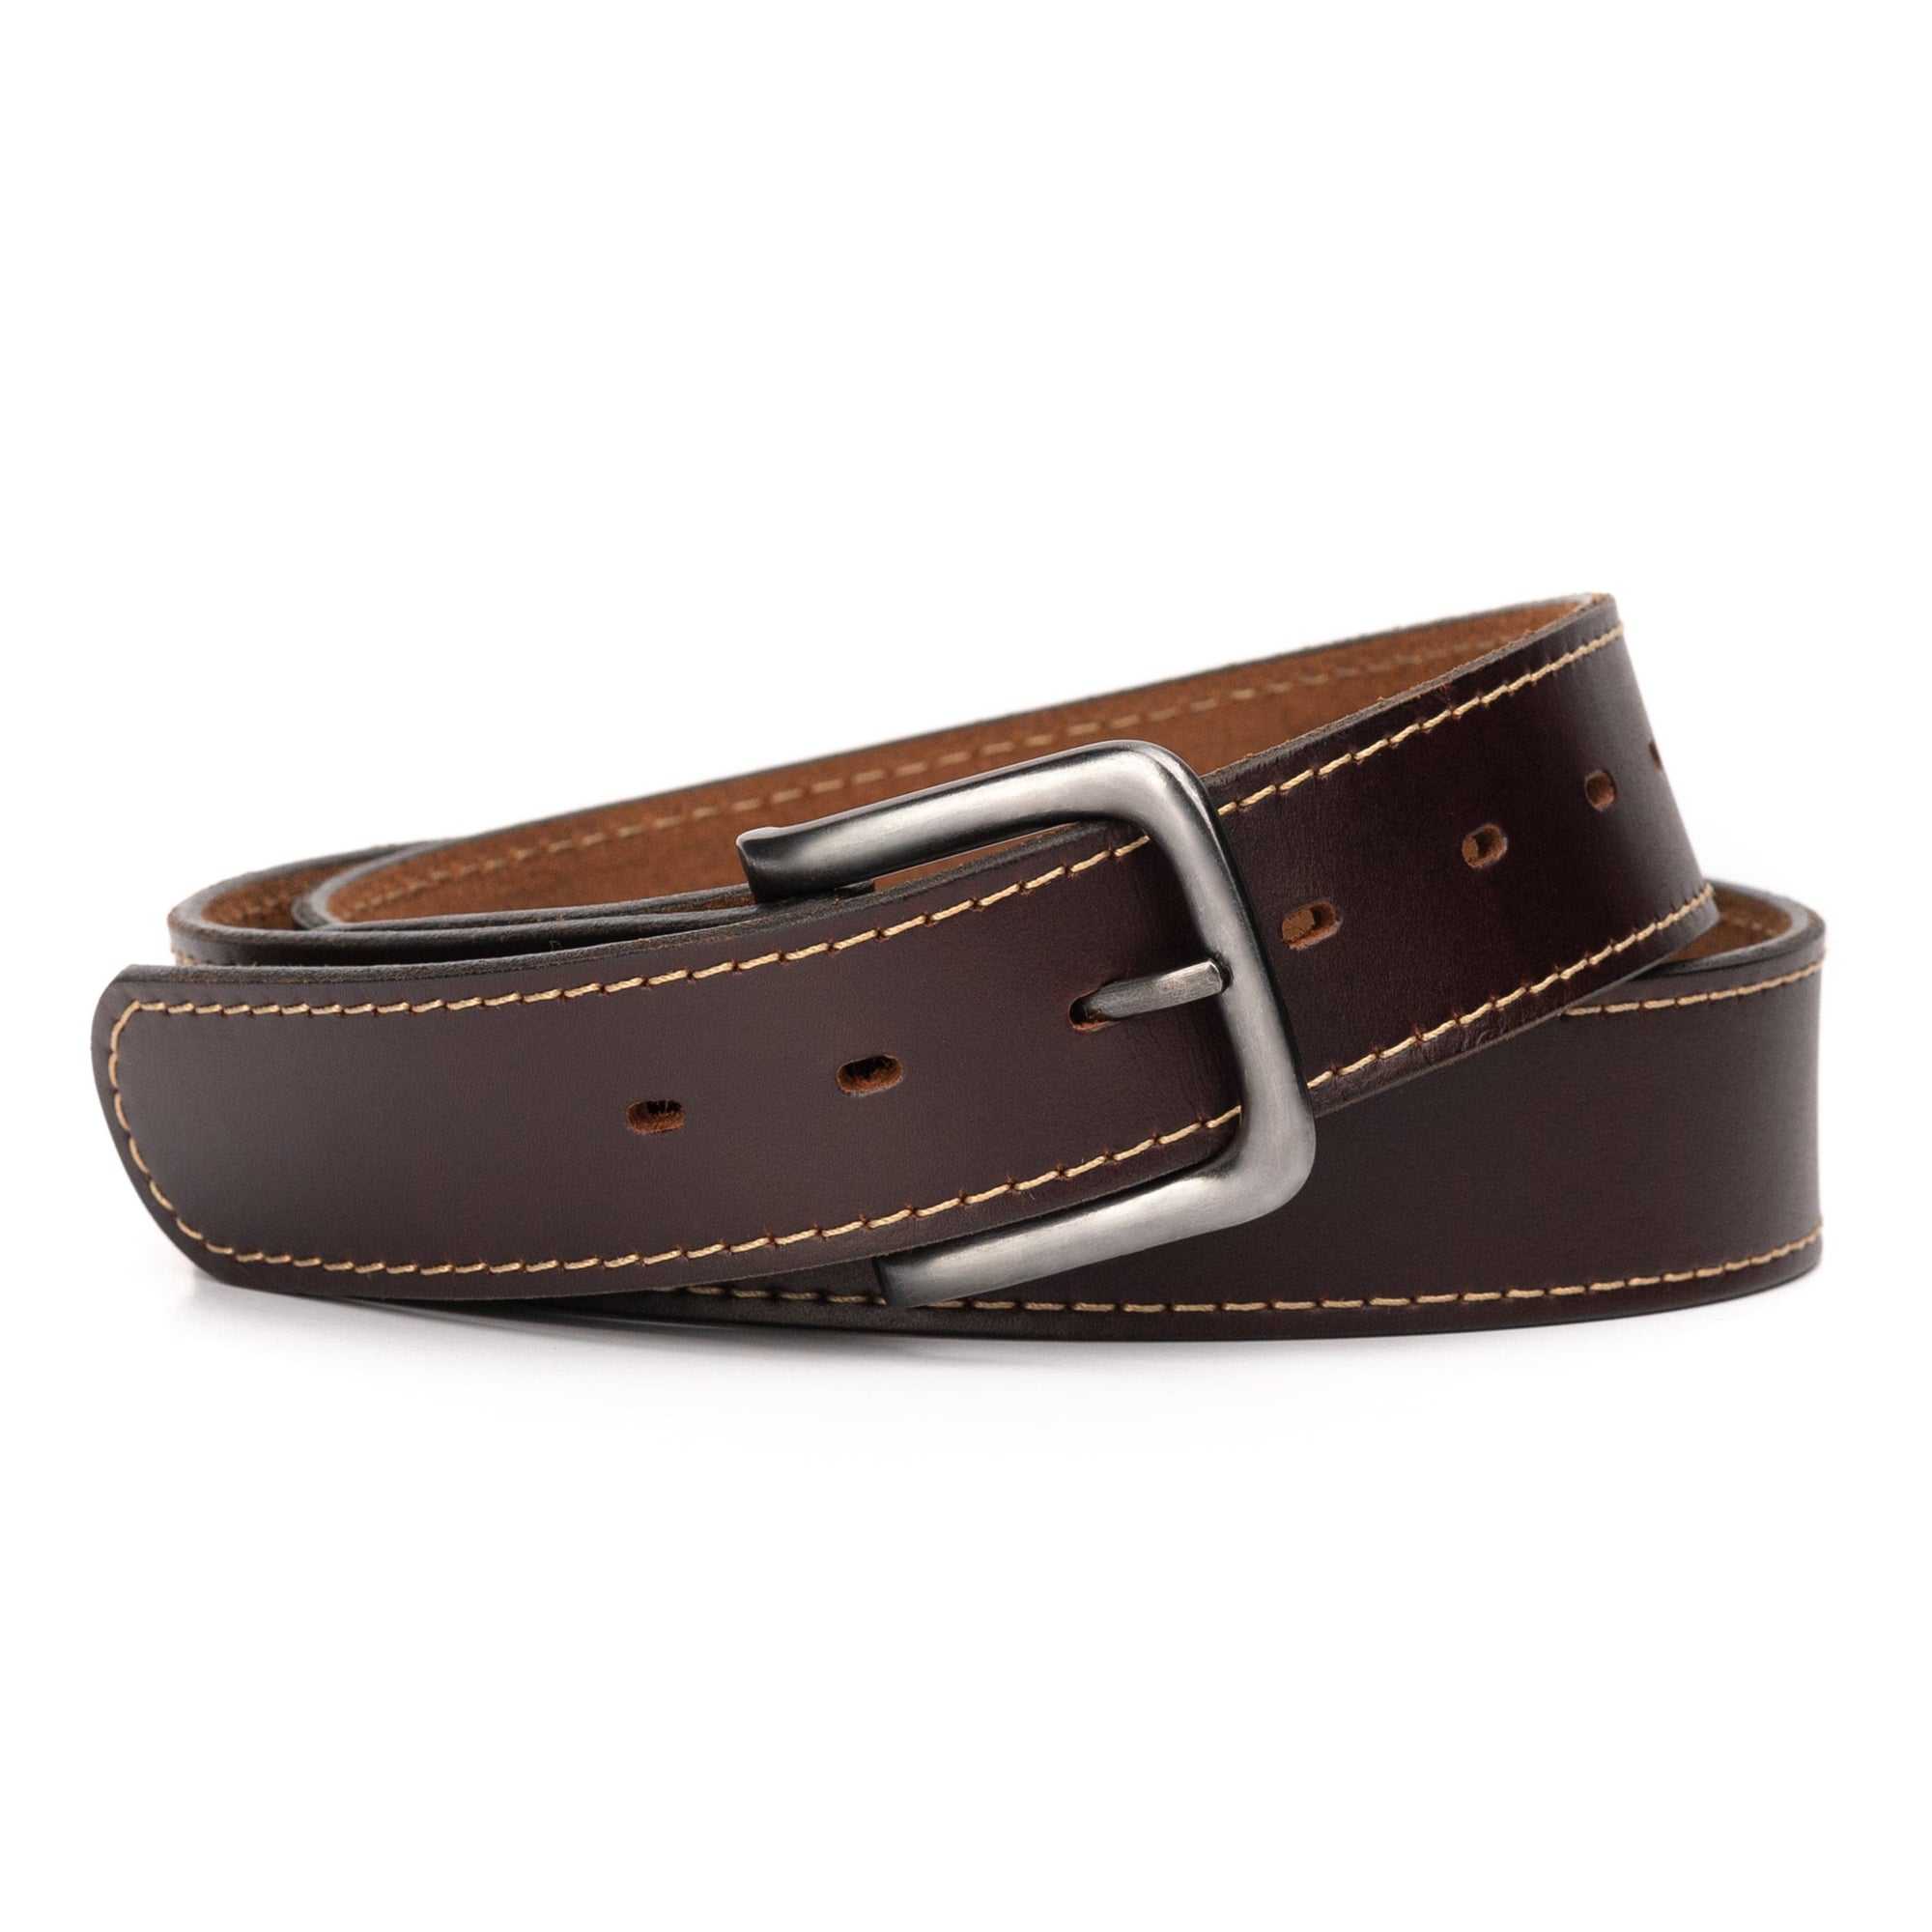 The Outrider Leather Belt - Main Street Forge